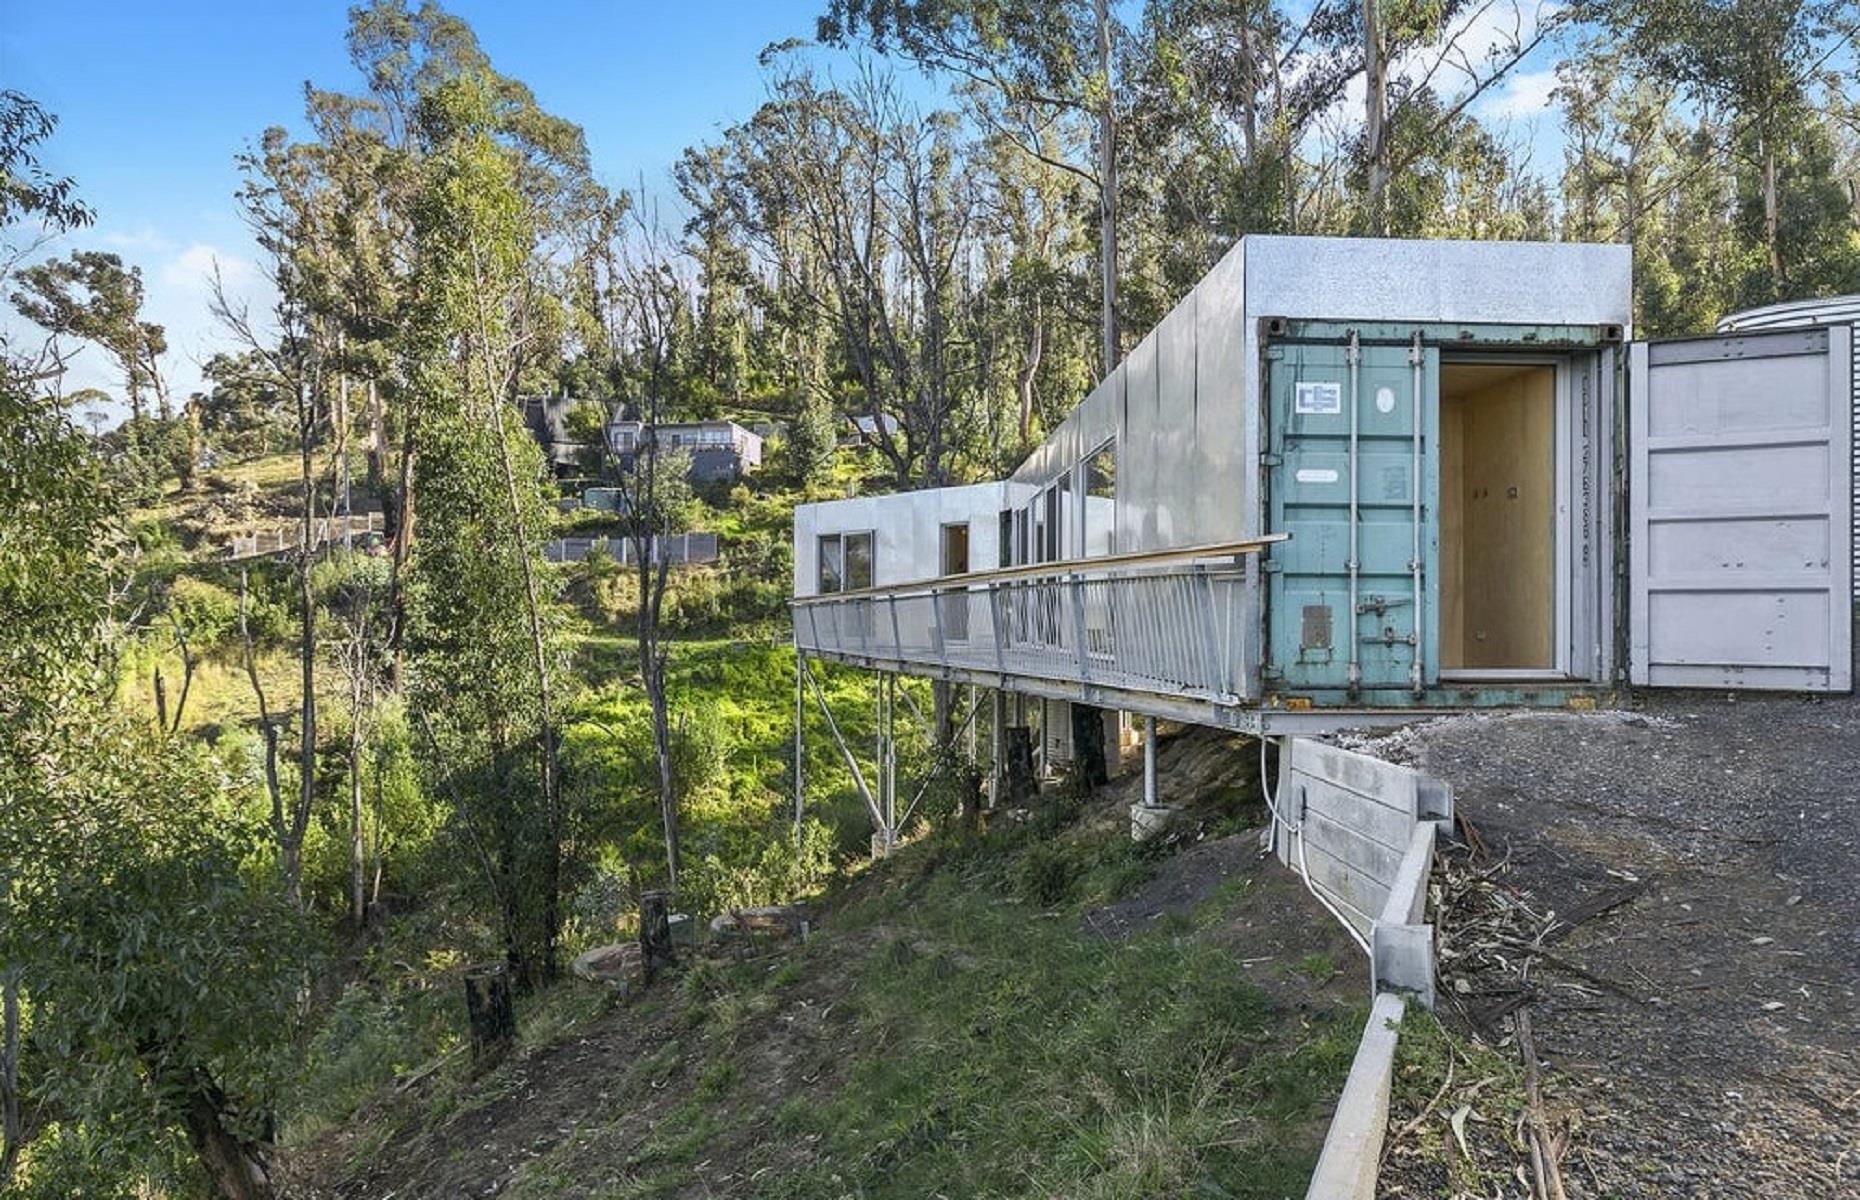 22 Incredible Shipping Container Homes In America, Around The World